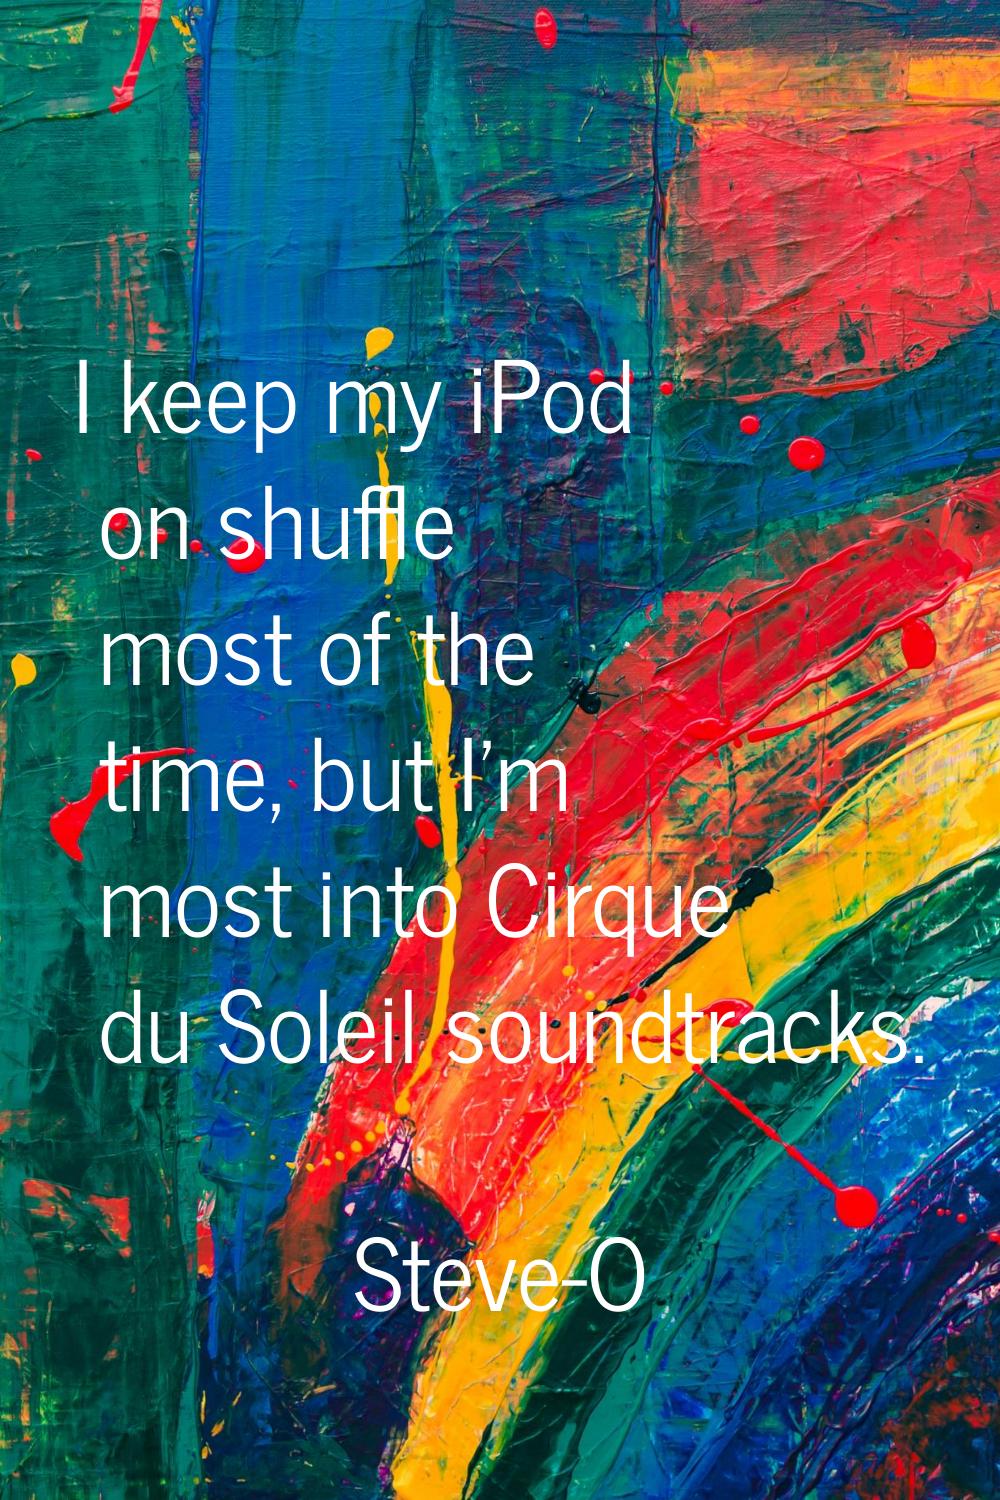 I keep my iPod on shuffle most of the time, but I'm most into Cirque du Soleil soundtracks.